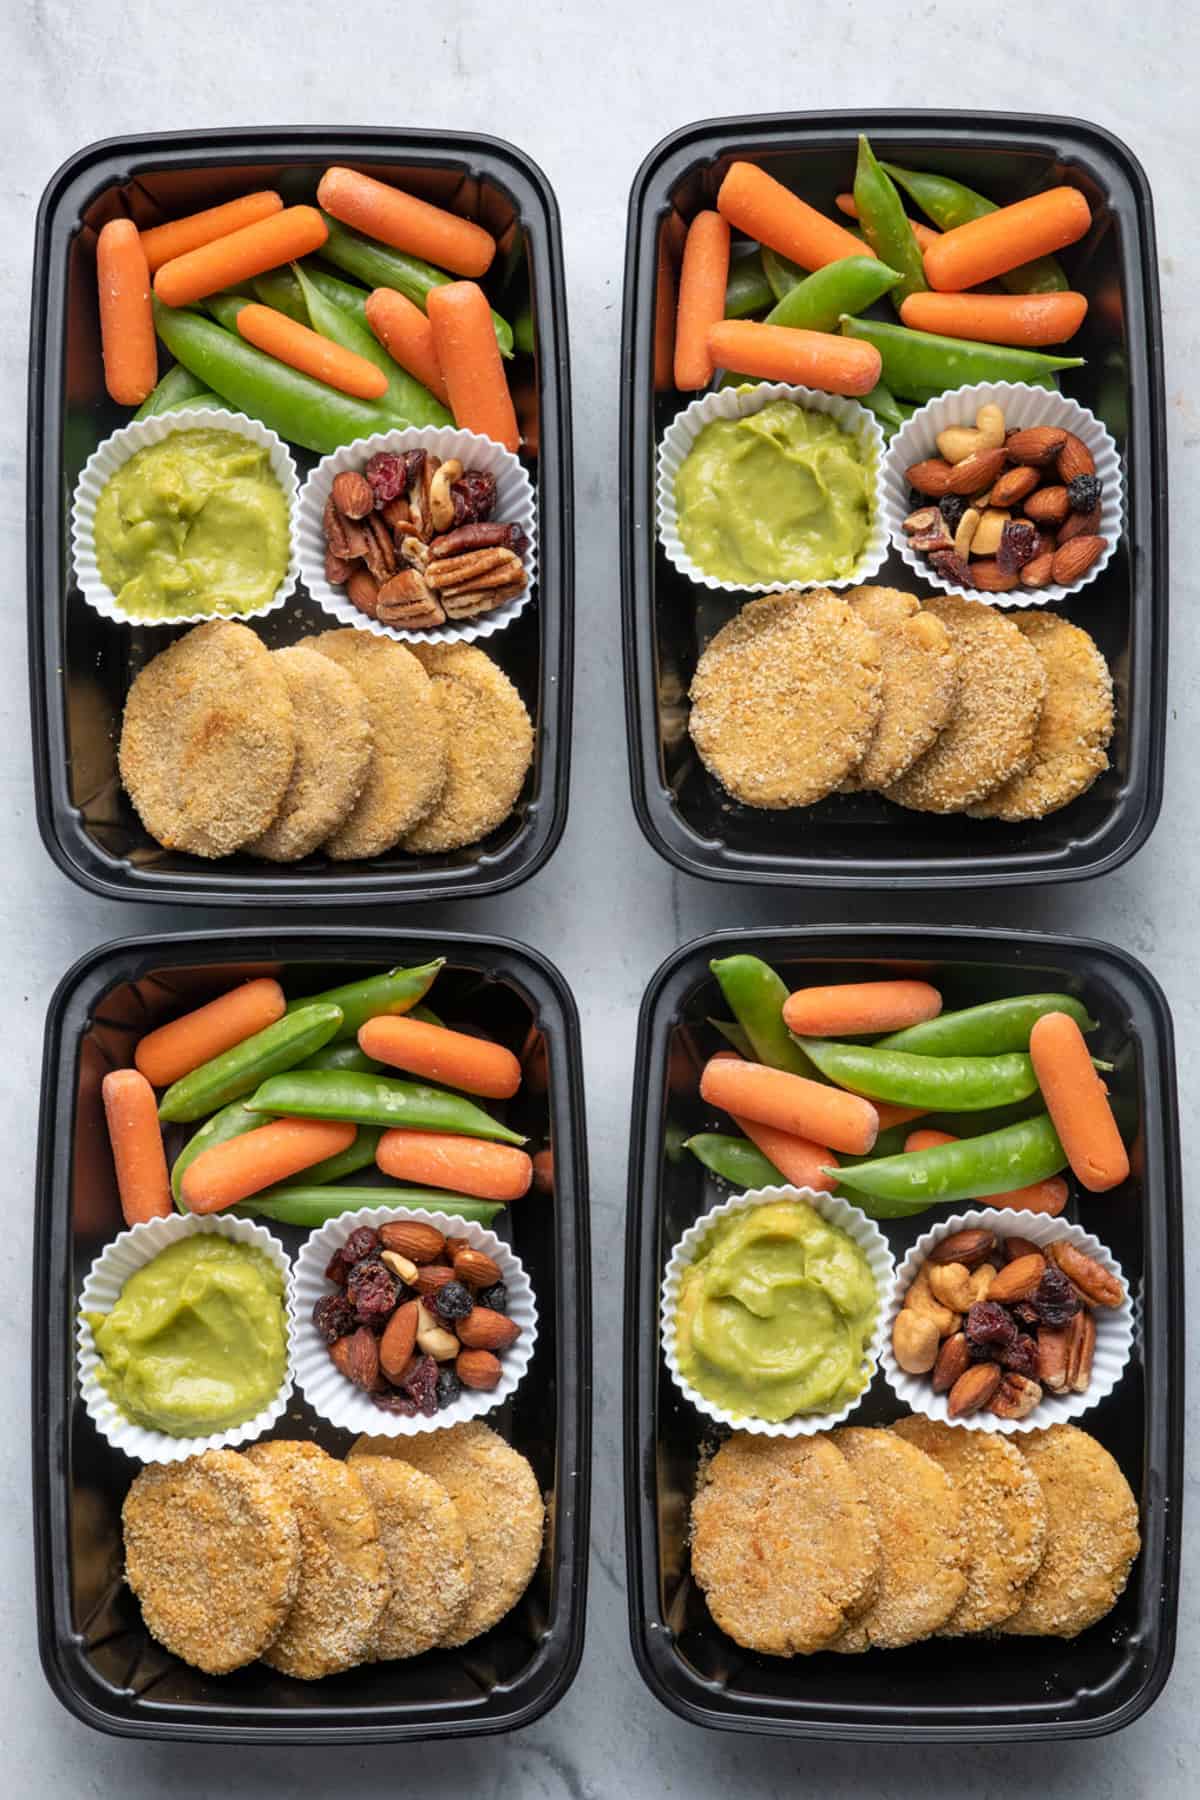 4 meal prep containers with the chickpea bites and avocado dip along with veggies and trail mix